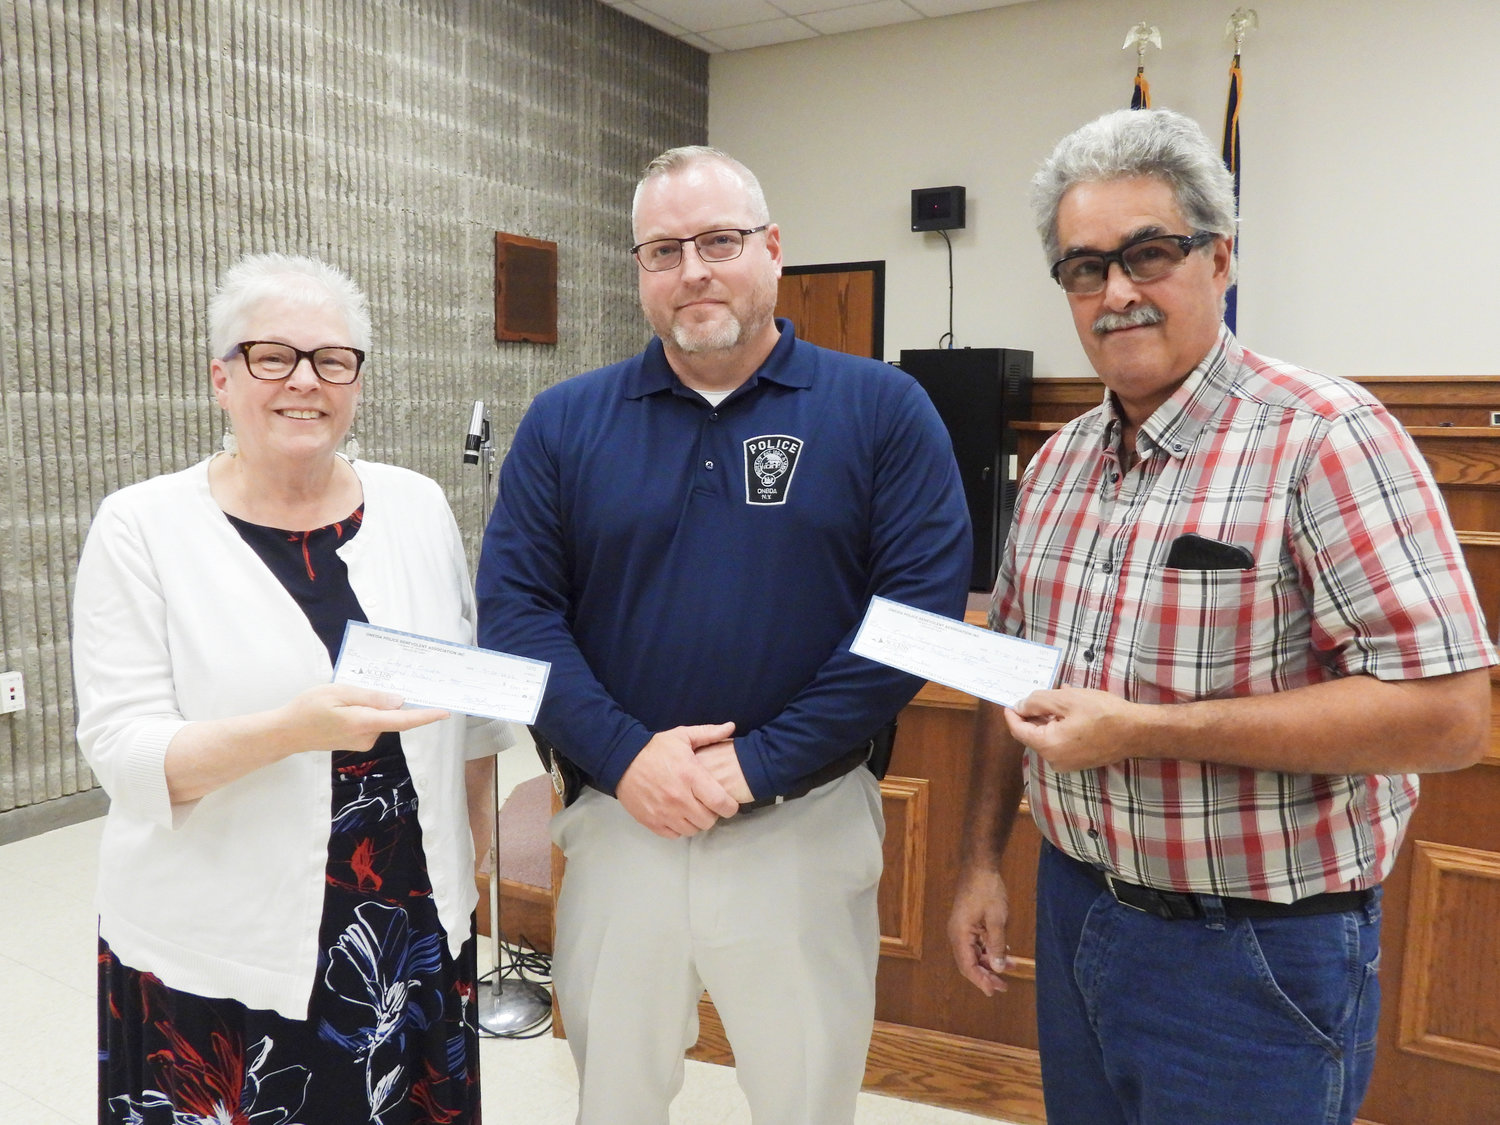 At the Tuesday, Sept. 20 meeting, Oneida Police Sgt. Mike Burgess, center, presents Oneida Improvement Committee President and Supervisor Joseph Magliocca with a check for $500 to help fund the Oneida Cat Committee’s efforts to trap, neuter, and release; $500 was also presented to Mayor Helen Acker to go towards construction of the new dog park in Oneida.